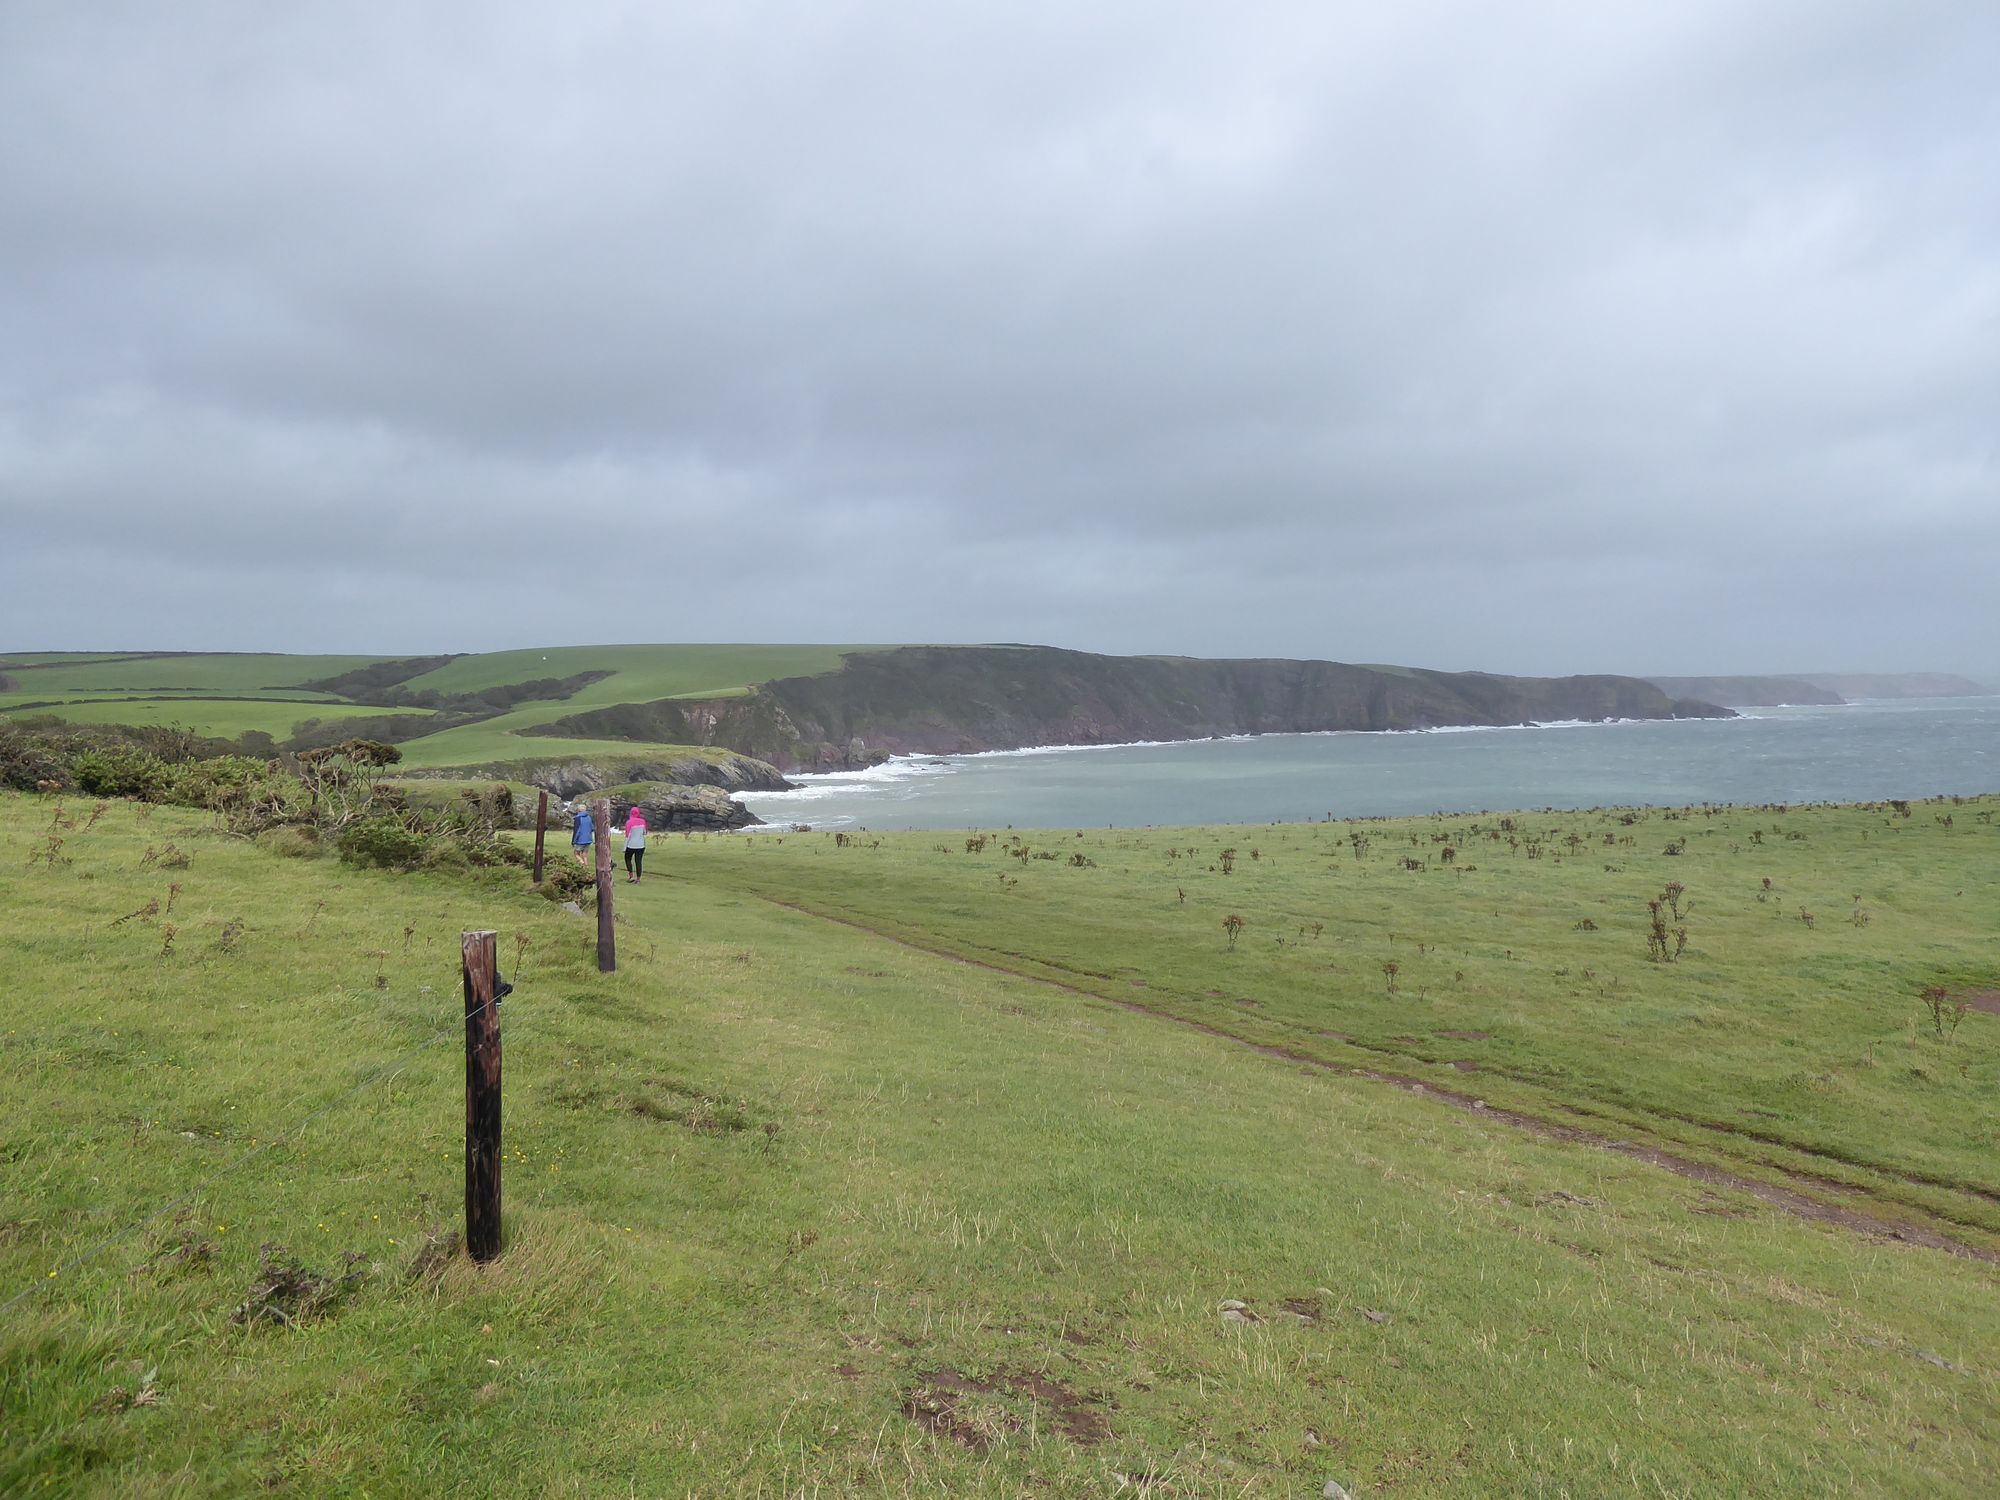 South Pembrokeshire: Storms, seals and social distancing